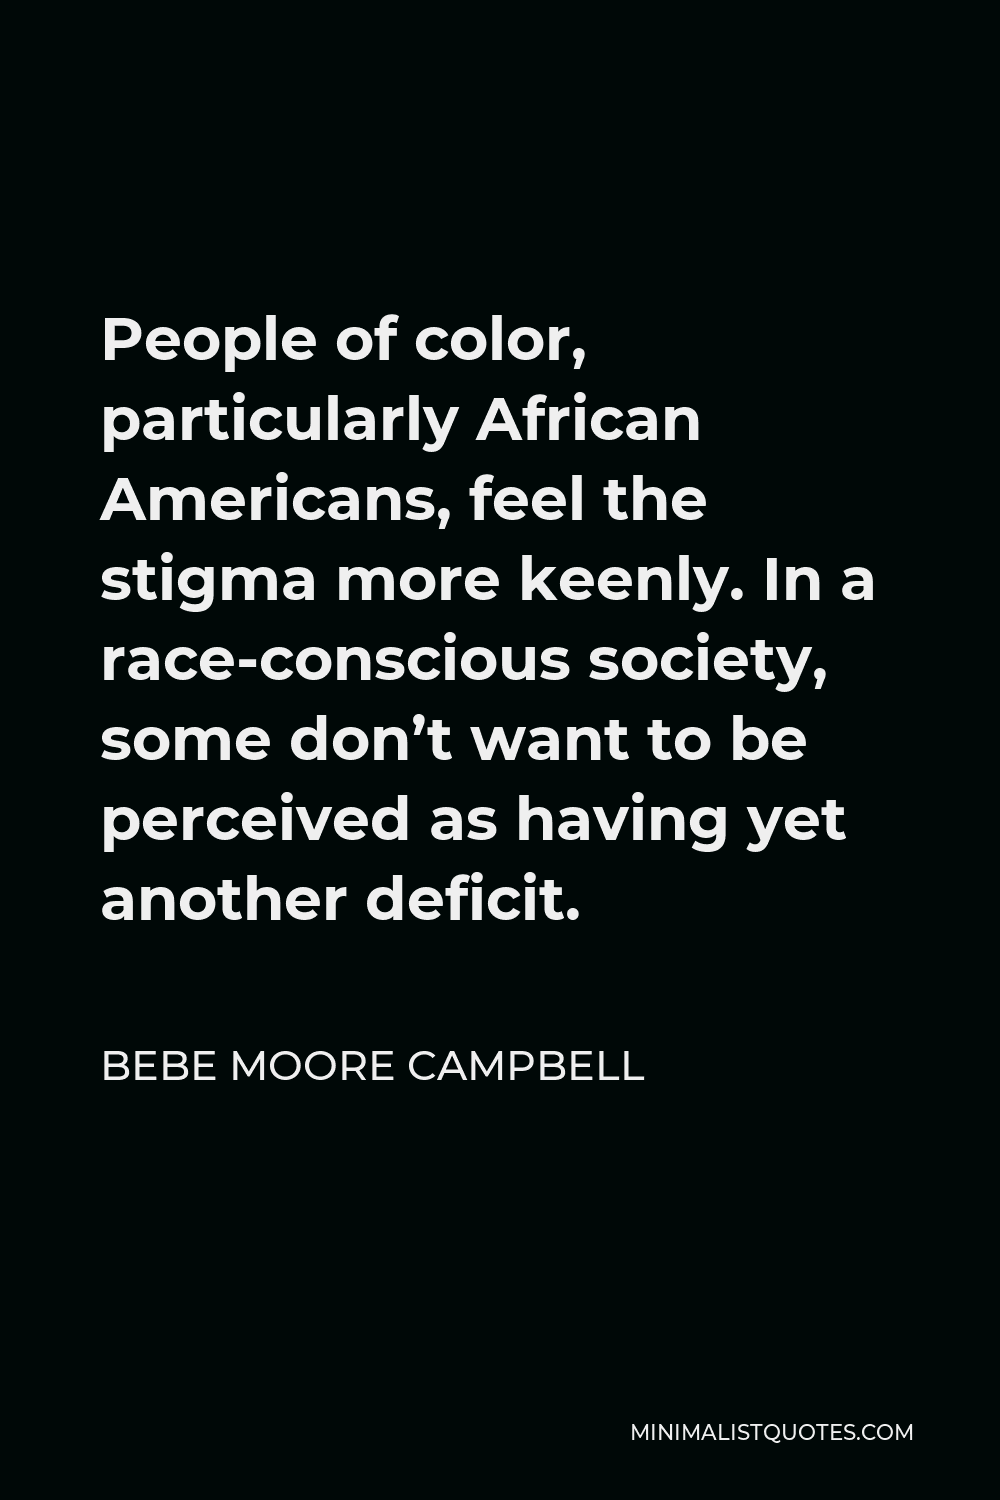 Bebe Moore Campbell Quote - People of color, particularly African Americans, feel the stigma more keenly. In a race-conscious society, some don’t want to be perceived as having yet another deficit.